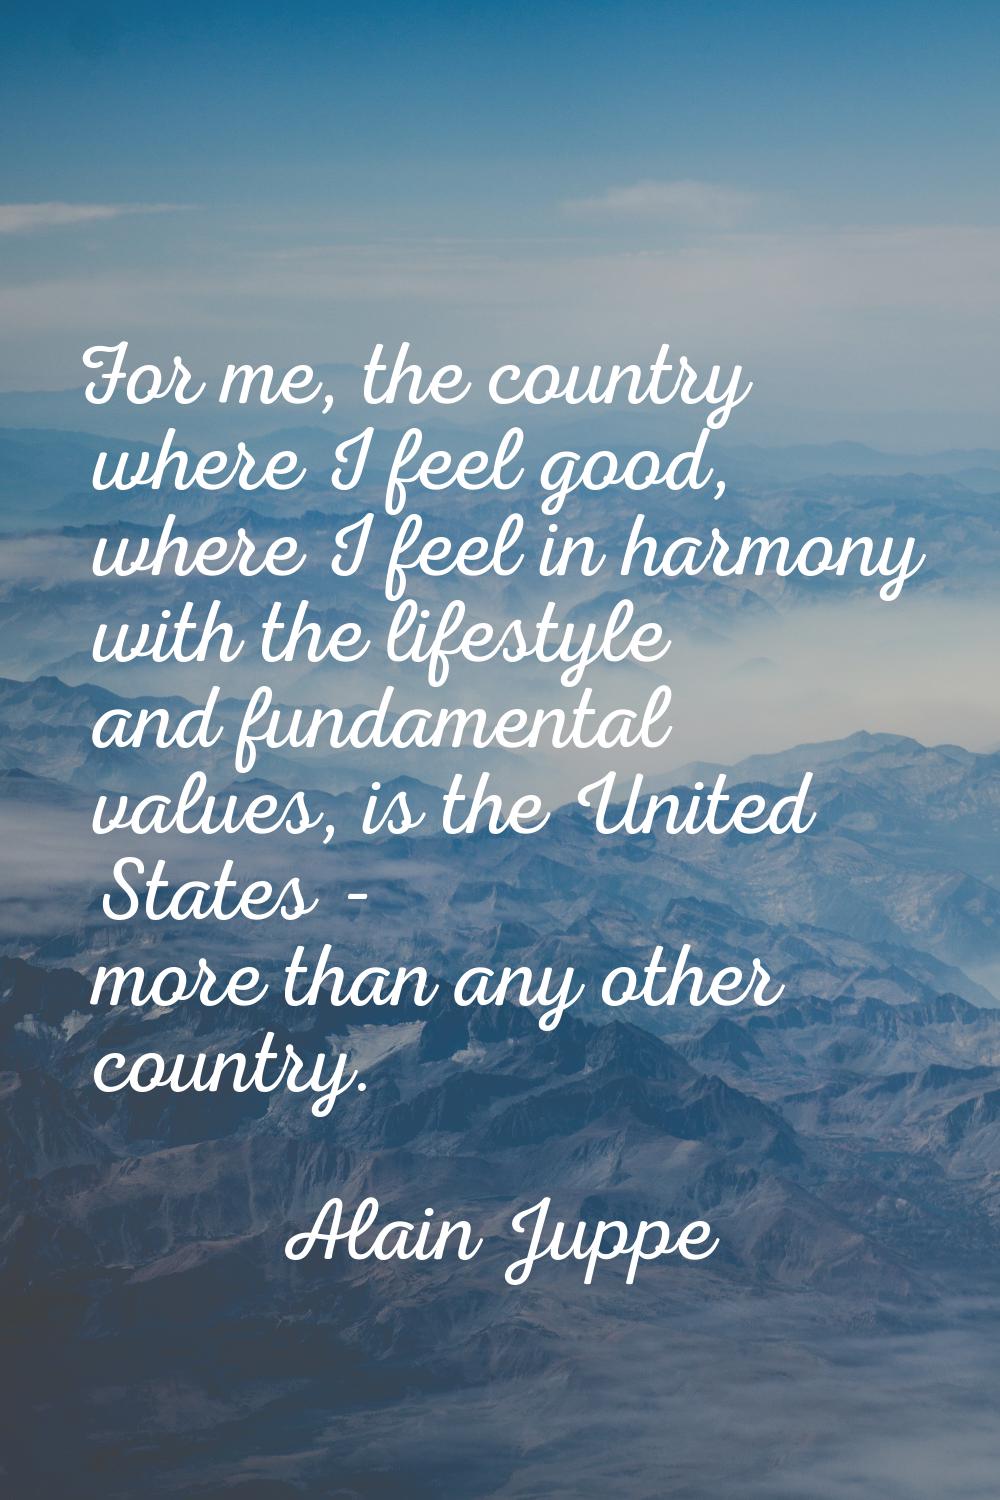 For me, the country where I feel good, where I feel in harmony with the lifestyle and fundamental v